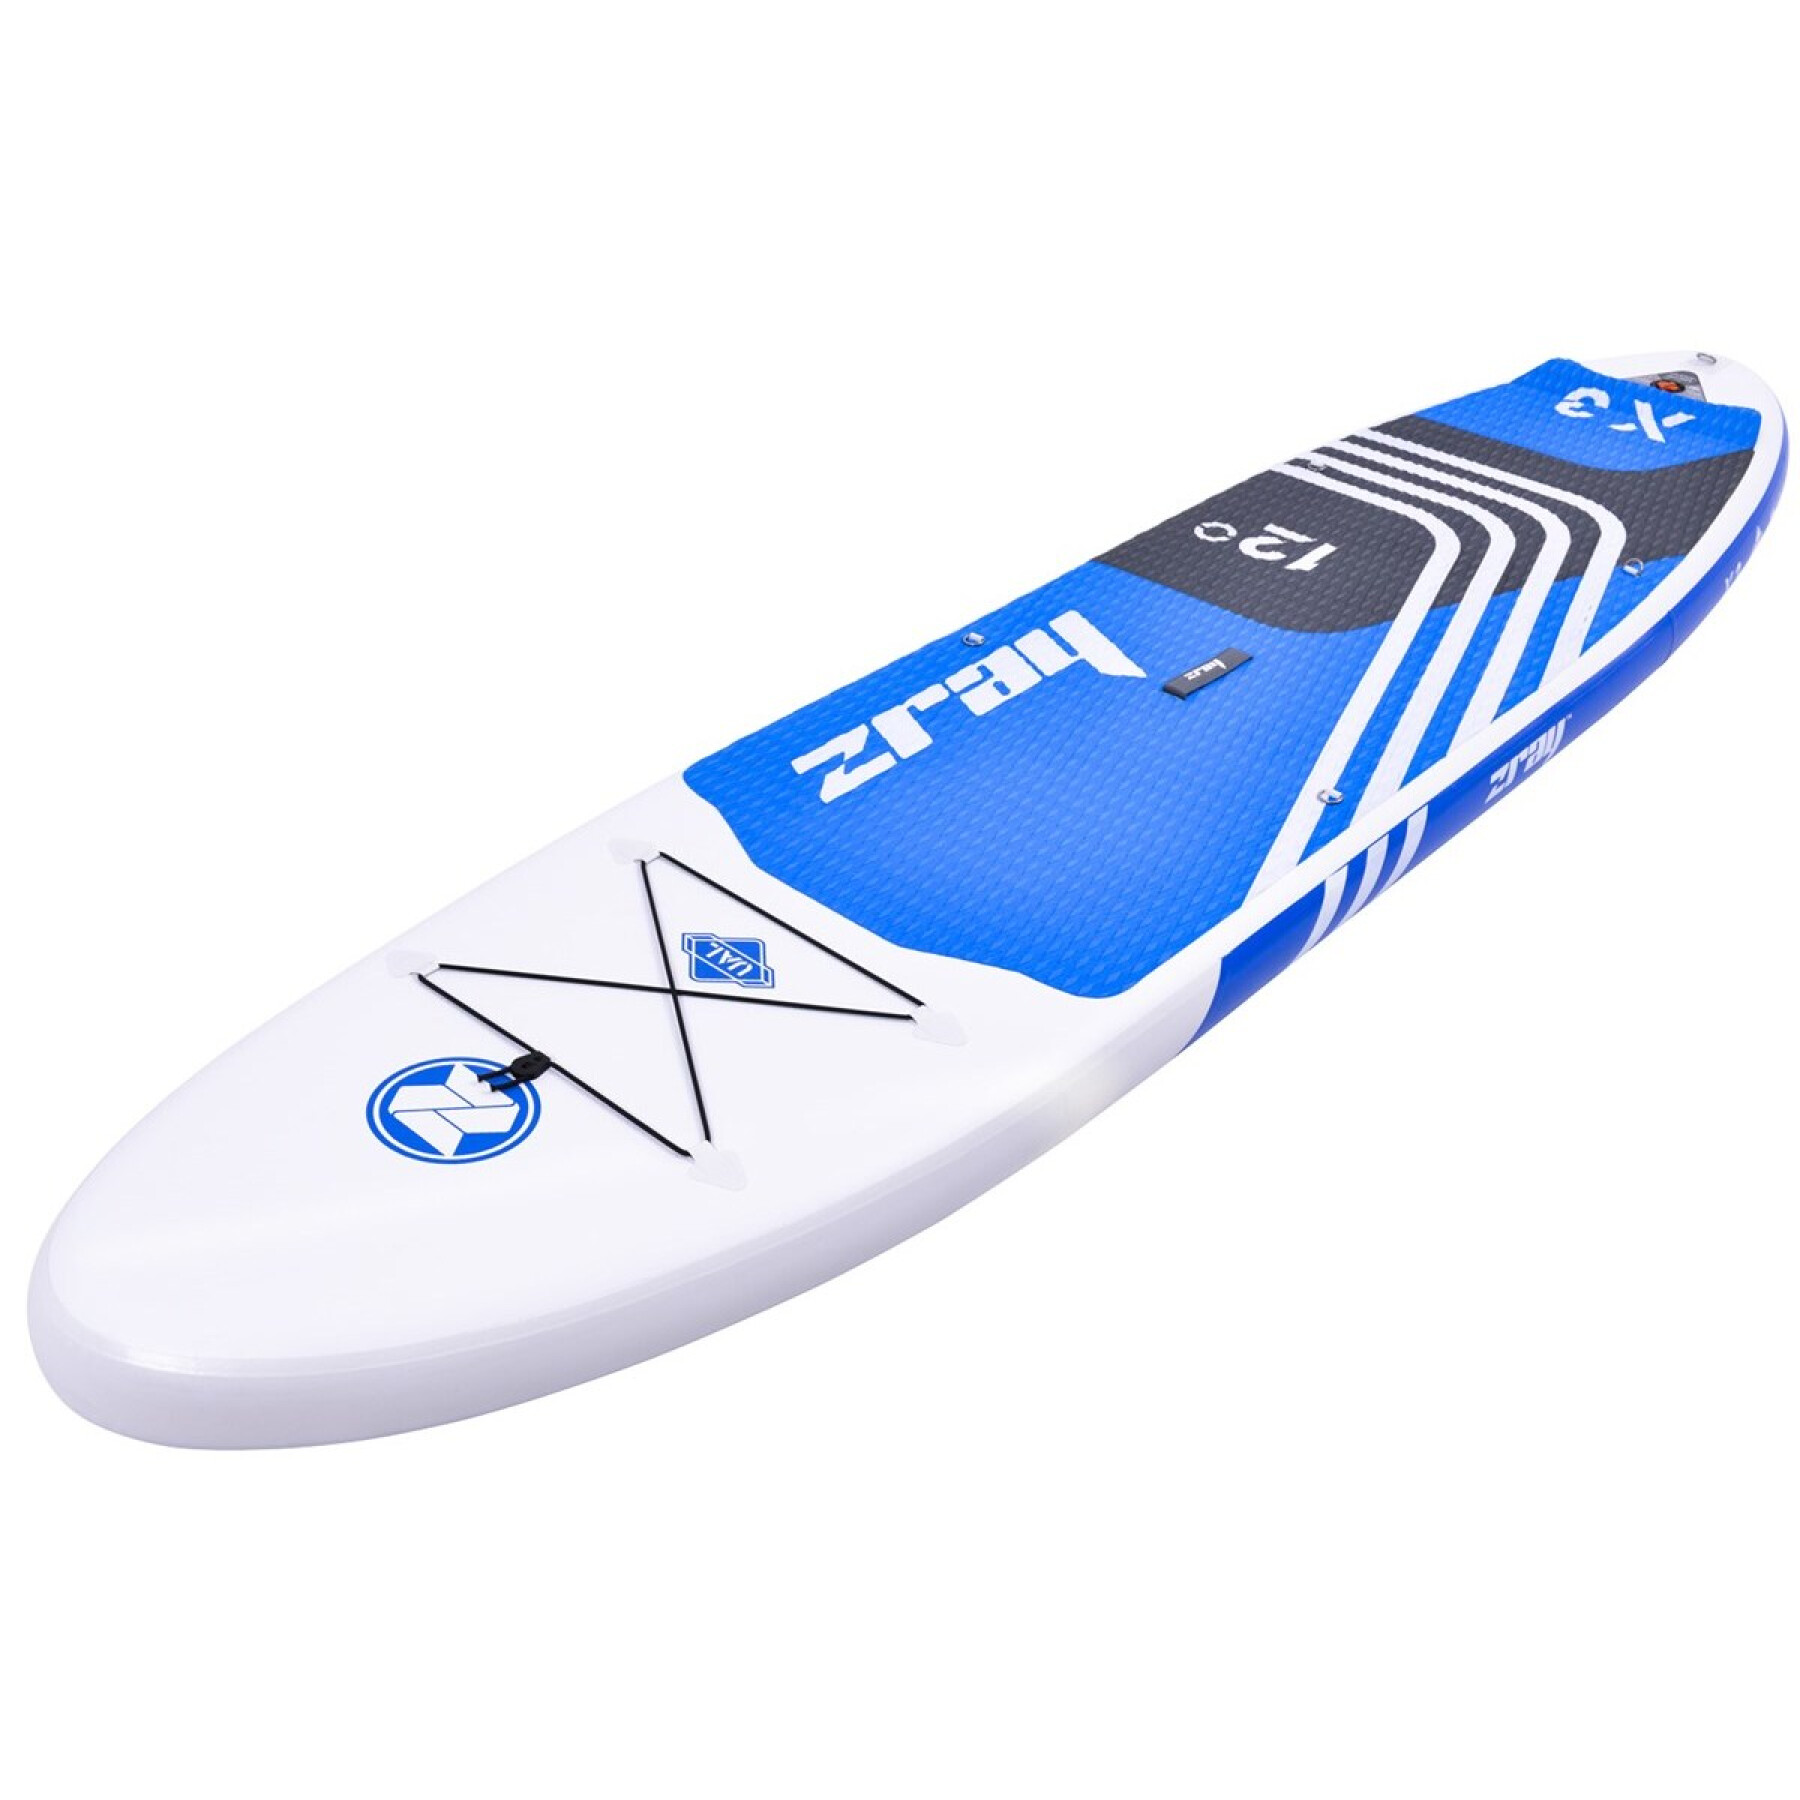 Stand-up paddle hinchable Zray X-Rider X3 12"